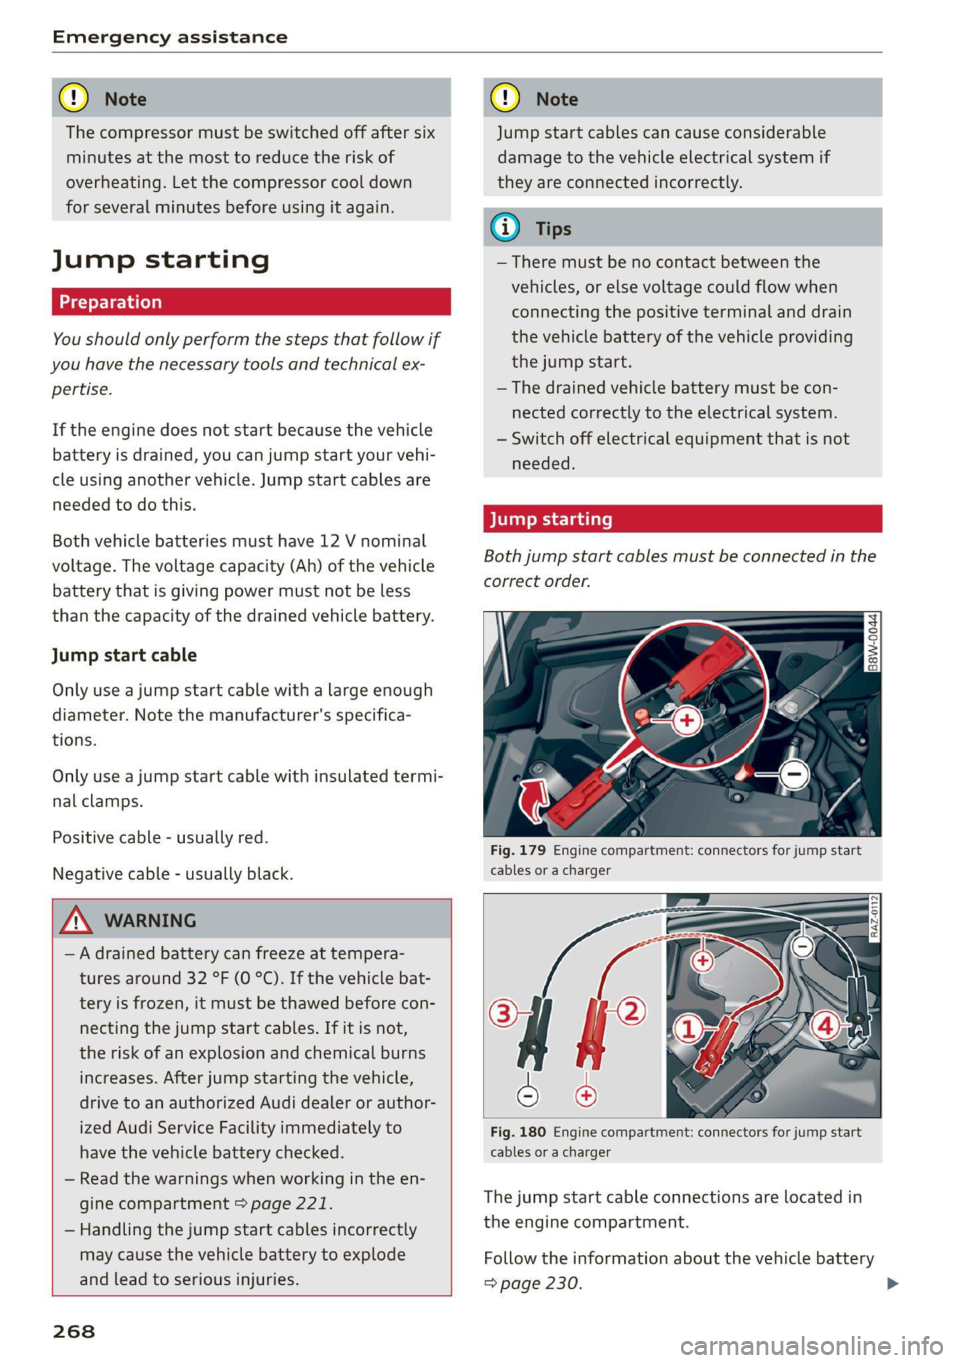 AUDI A4 2021  Owner´s Manual Emergency assistance 
  
@) Note 
The compressor must be switched off after six 
minutes at the most to reduce the risk  of 
overheating. Let the compressor cool down 
for several minutes before using